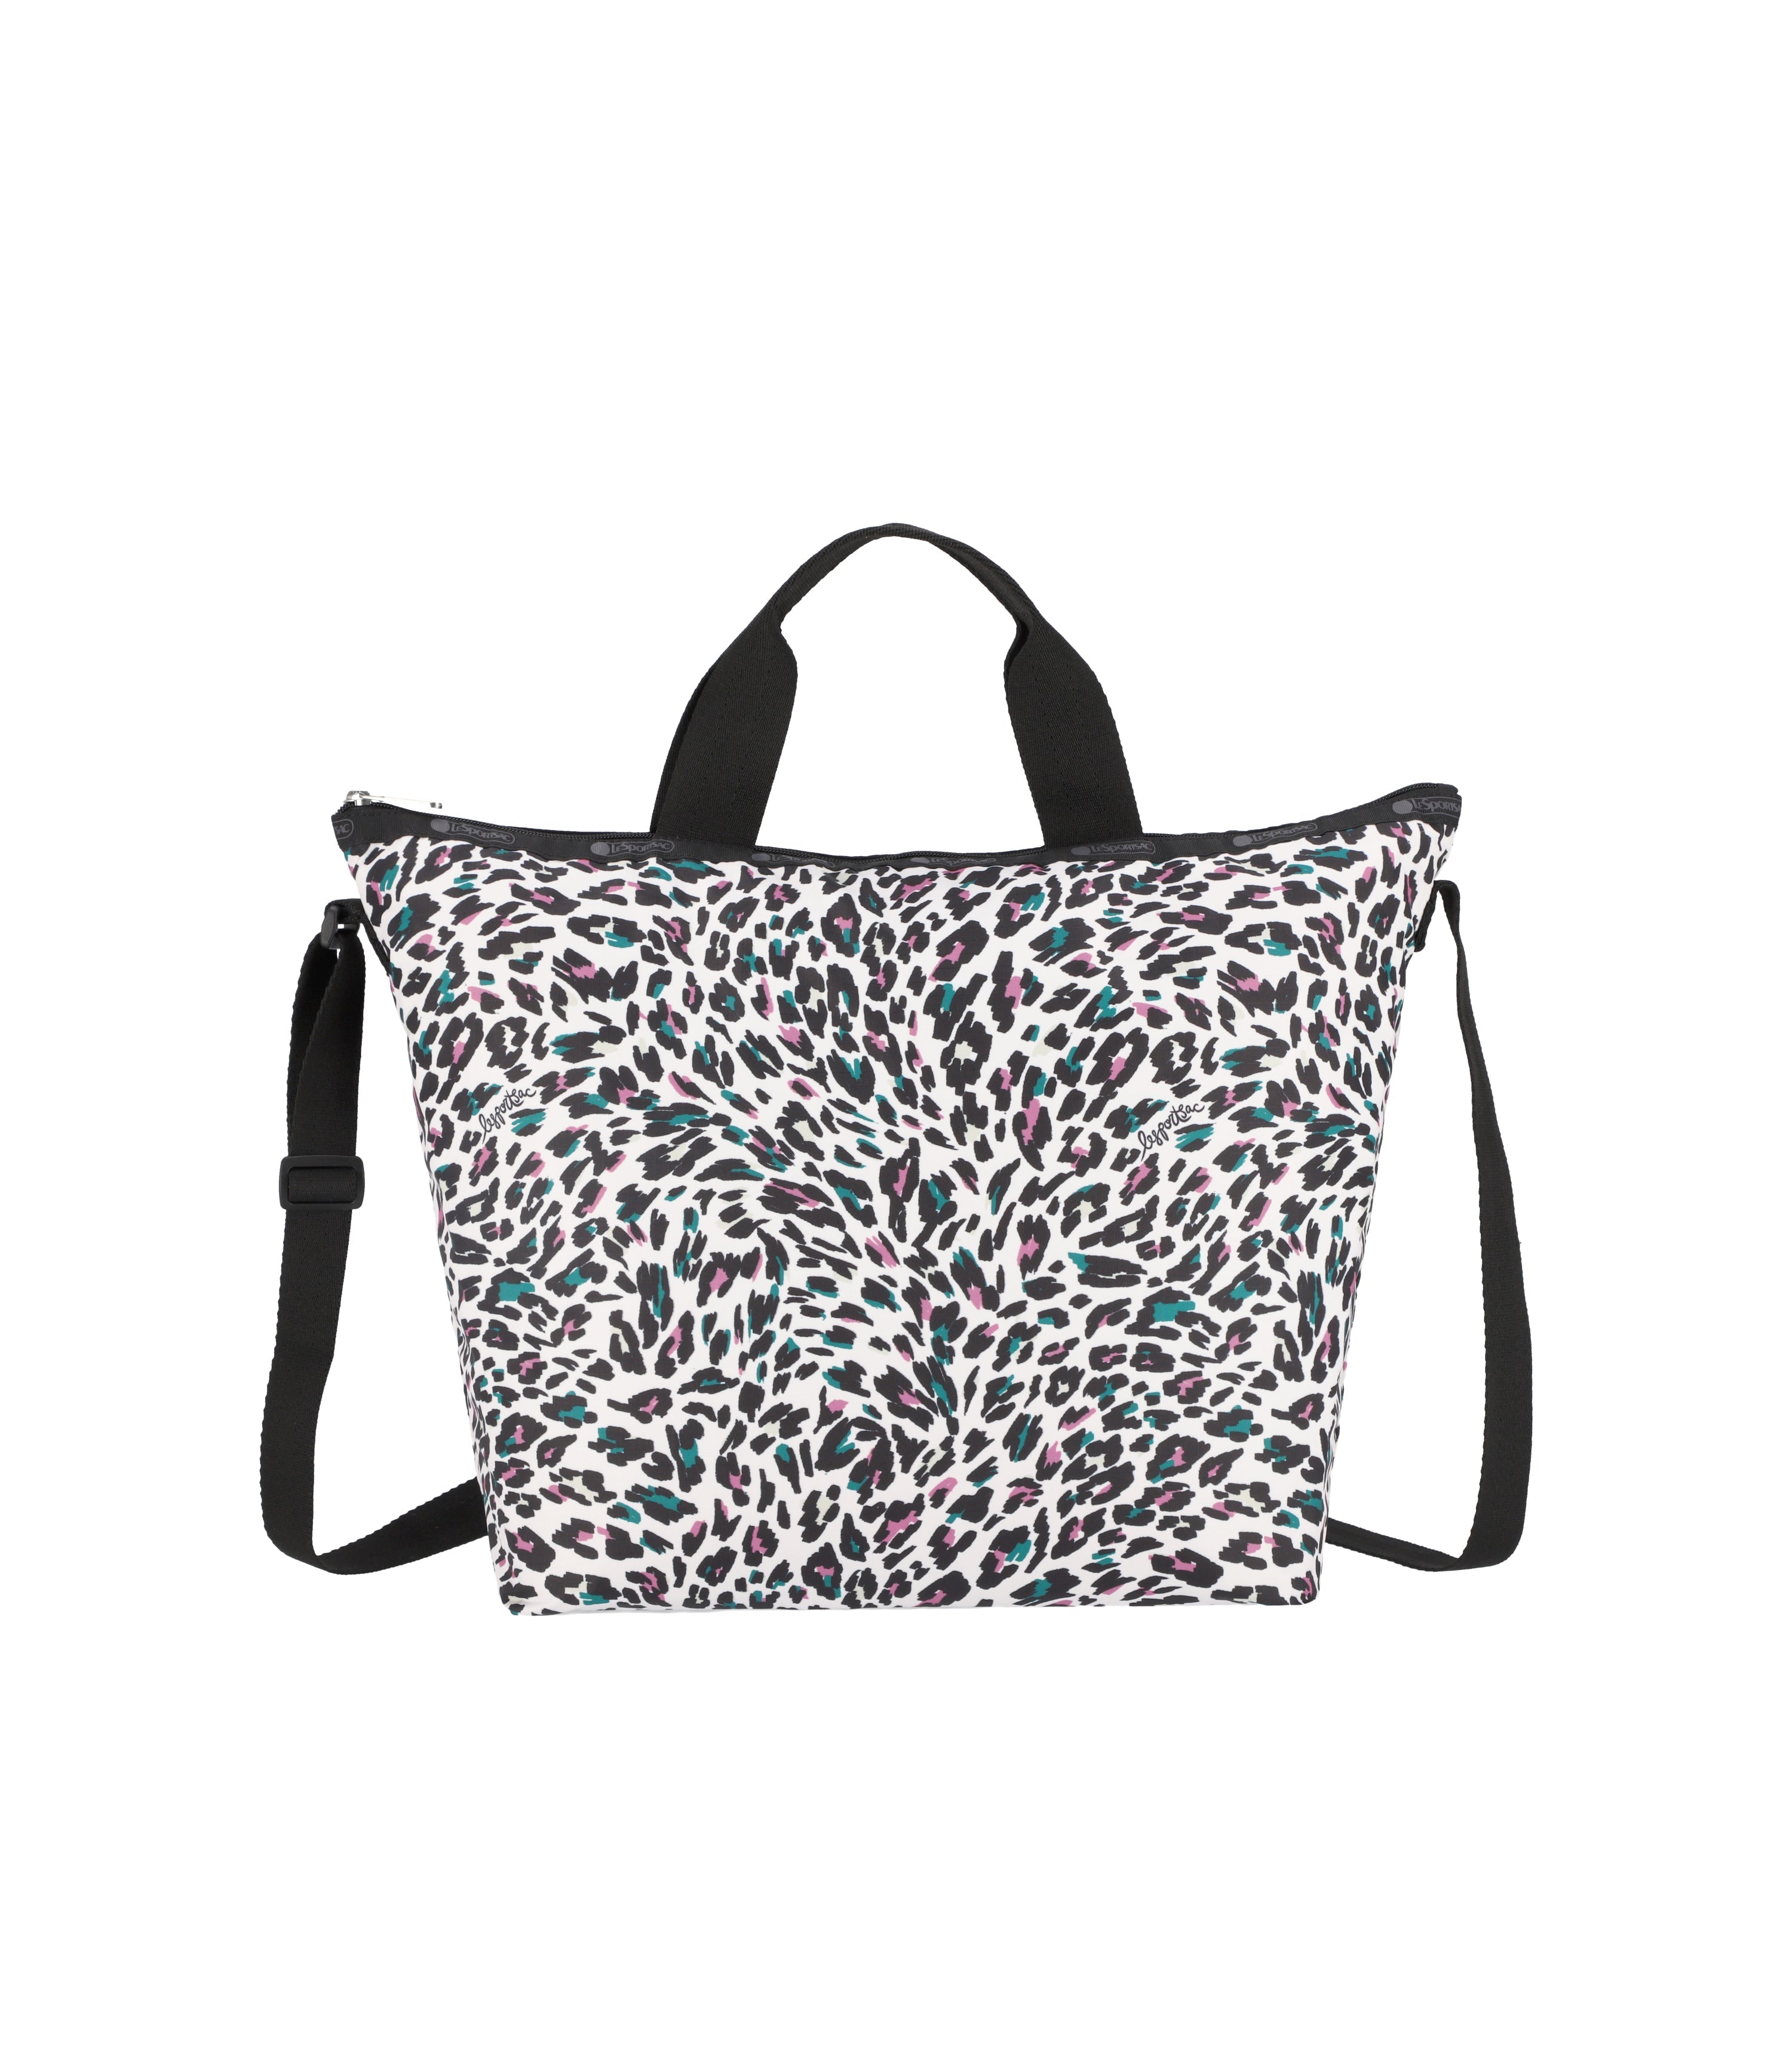 Lesportsac Deluxe Easy Carry Tote - Harvest Leopard Print